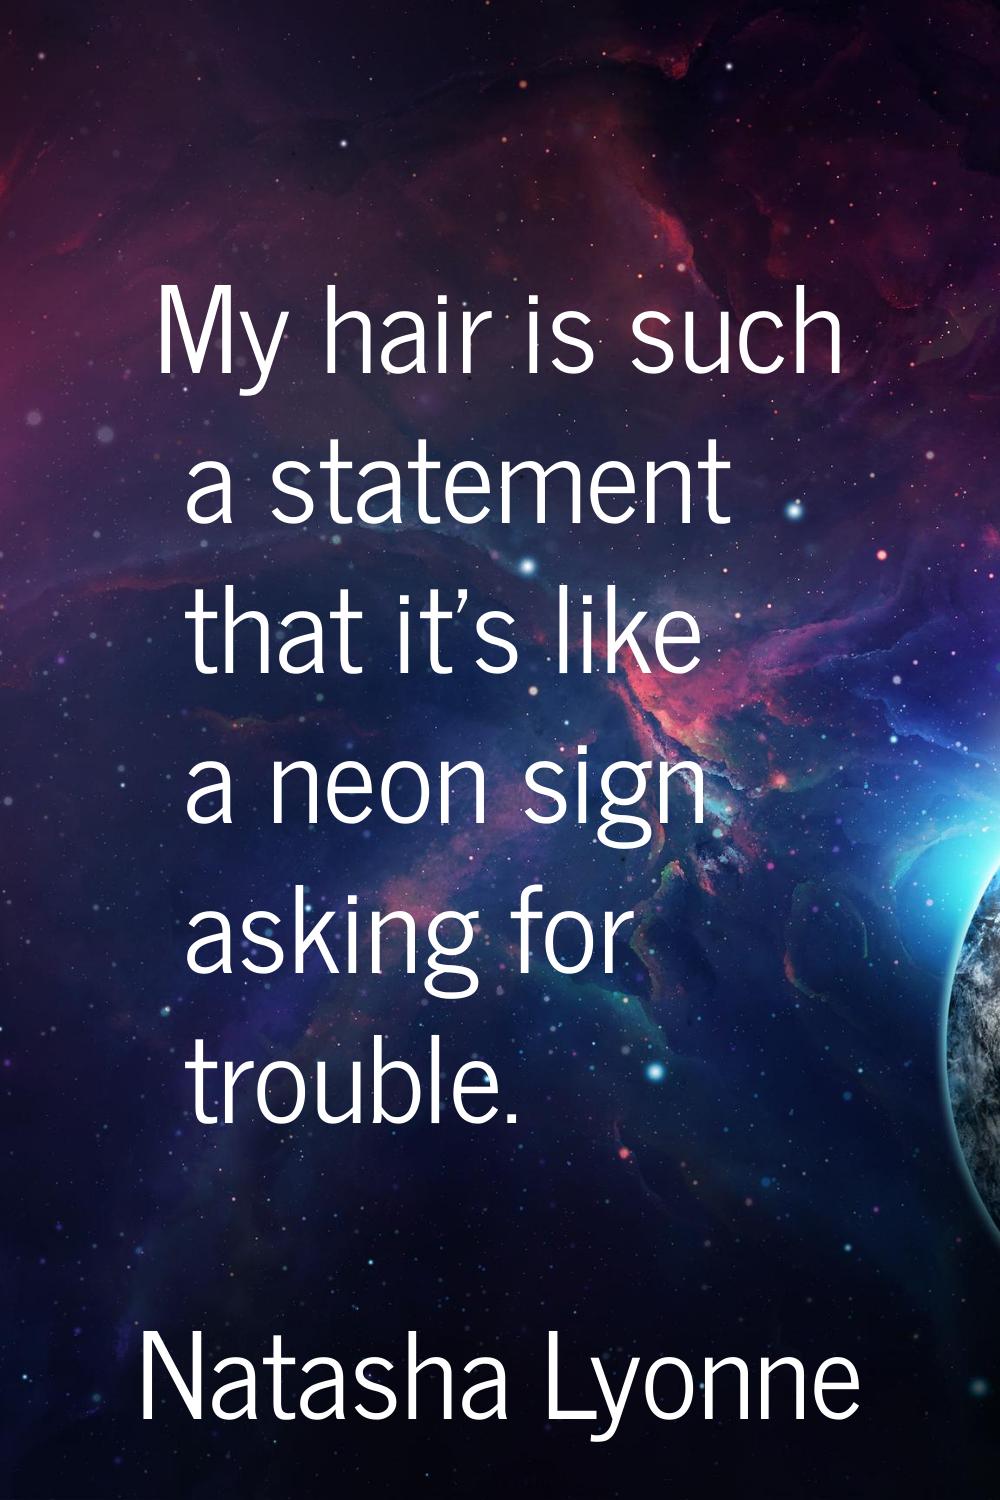 My hair is such a statement that it's like a neon sign asking for trouble.